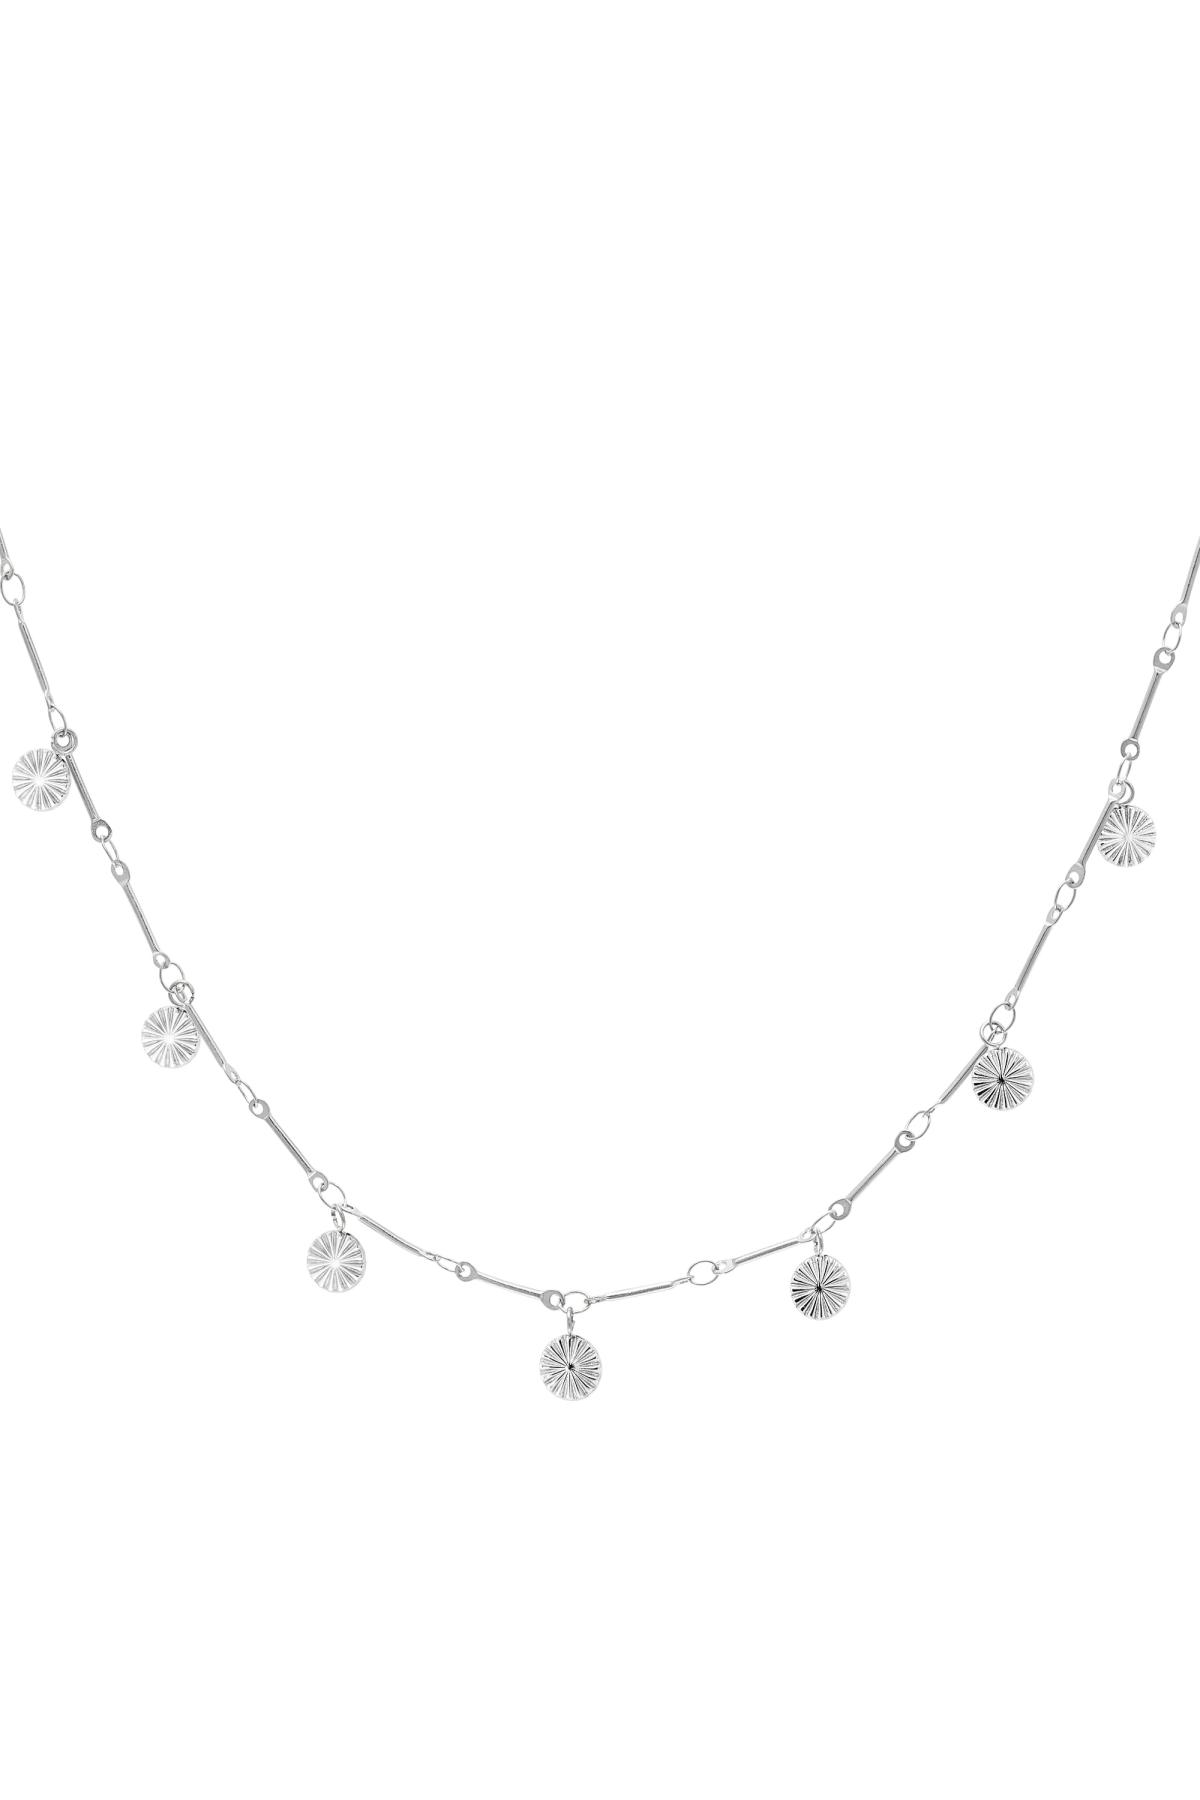 Necklace with flower coin charms Silver Stainless Steel